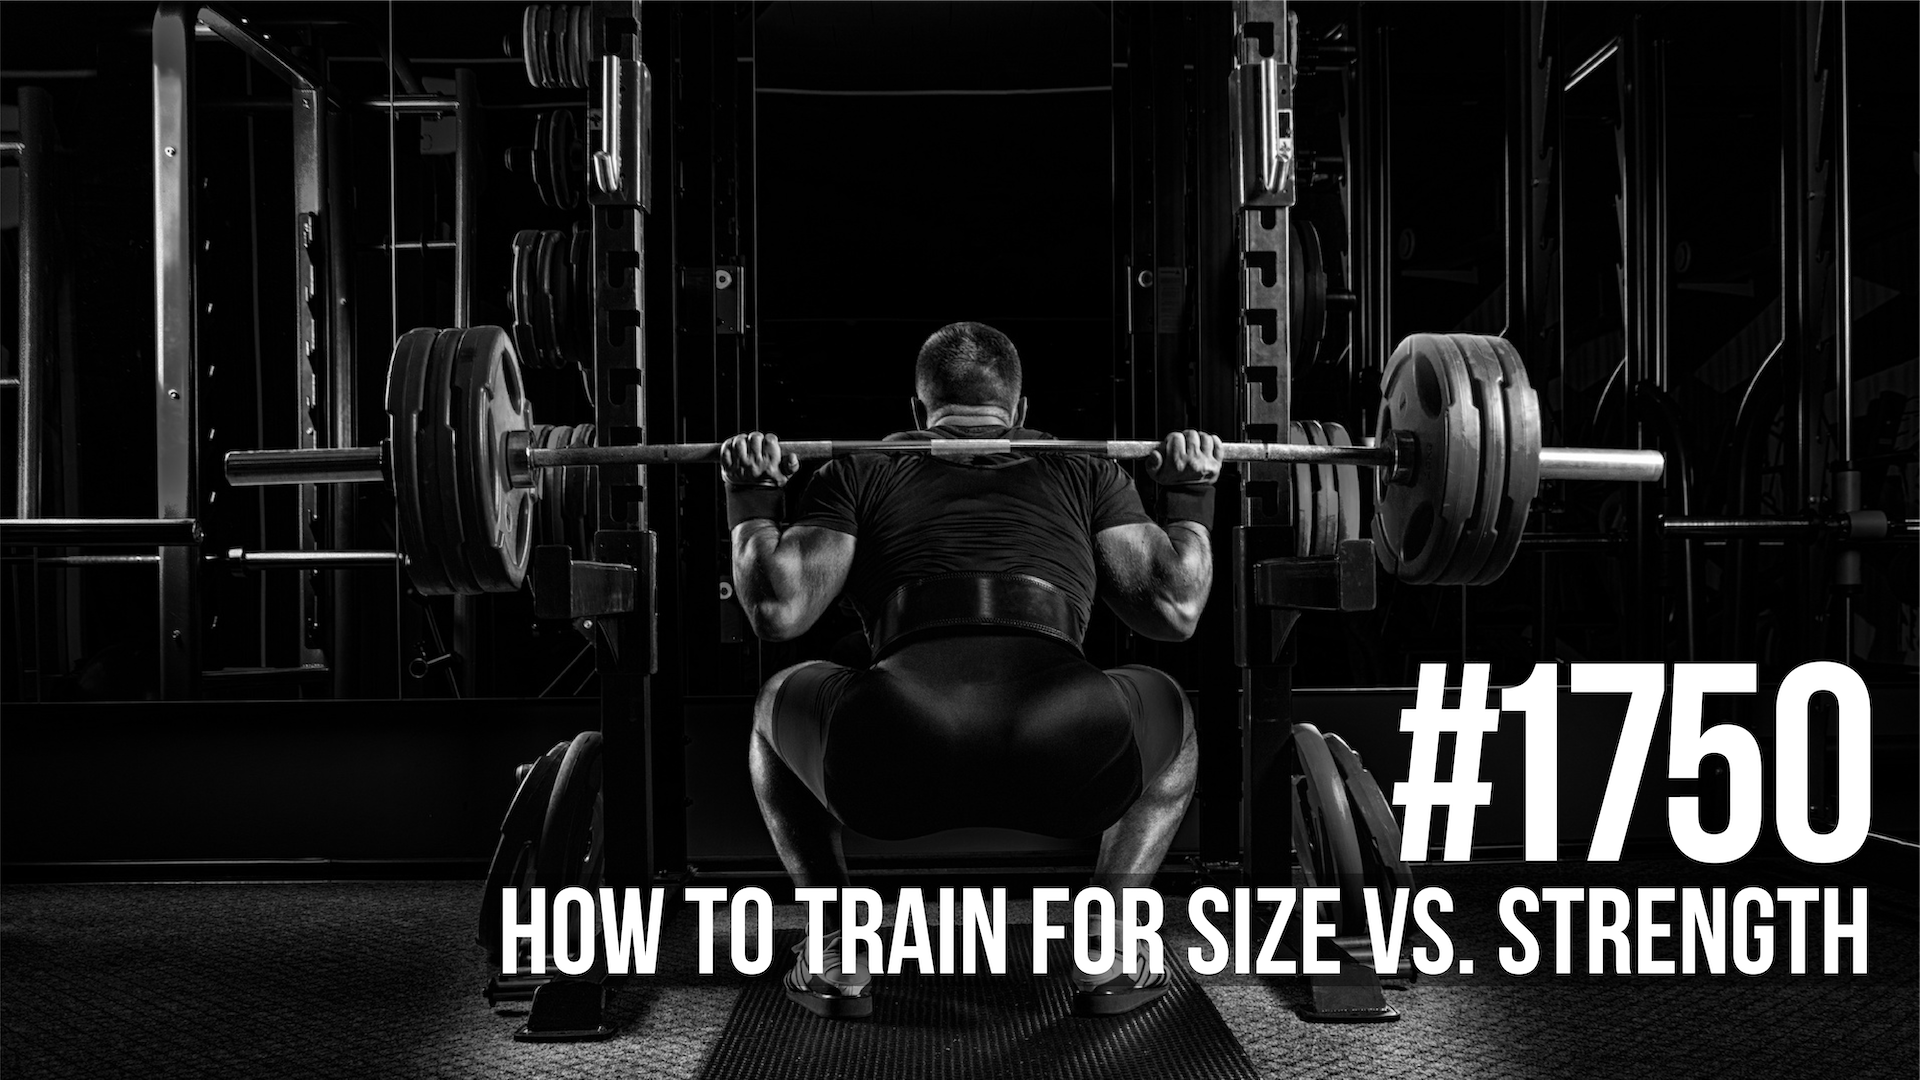 1750: How To Train For Size Vs. Strength